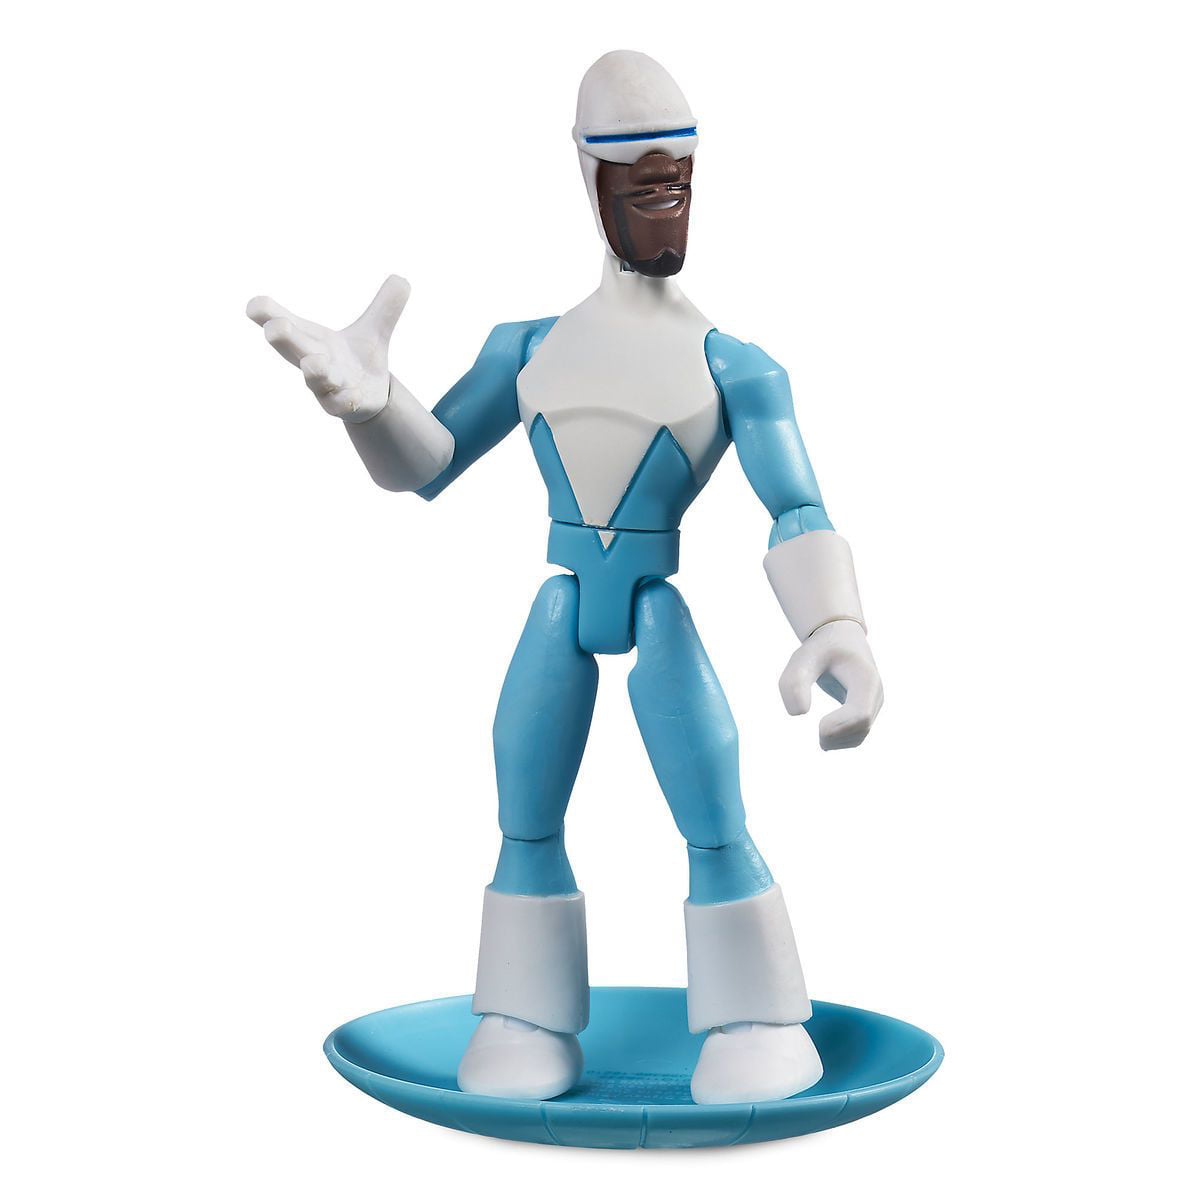 DISNEY PIXAR INCREDIBLES 2 Movie FROZONE Poseable Action Figure Toy New In Box